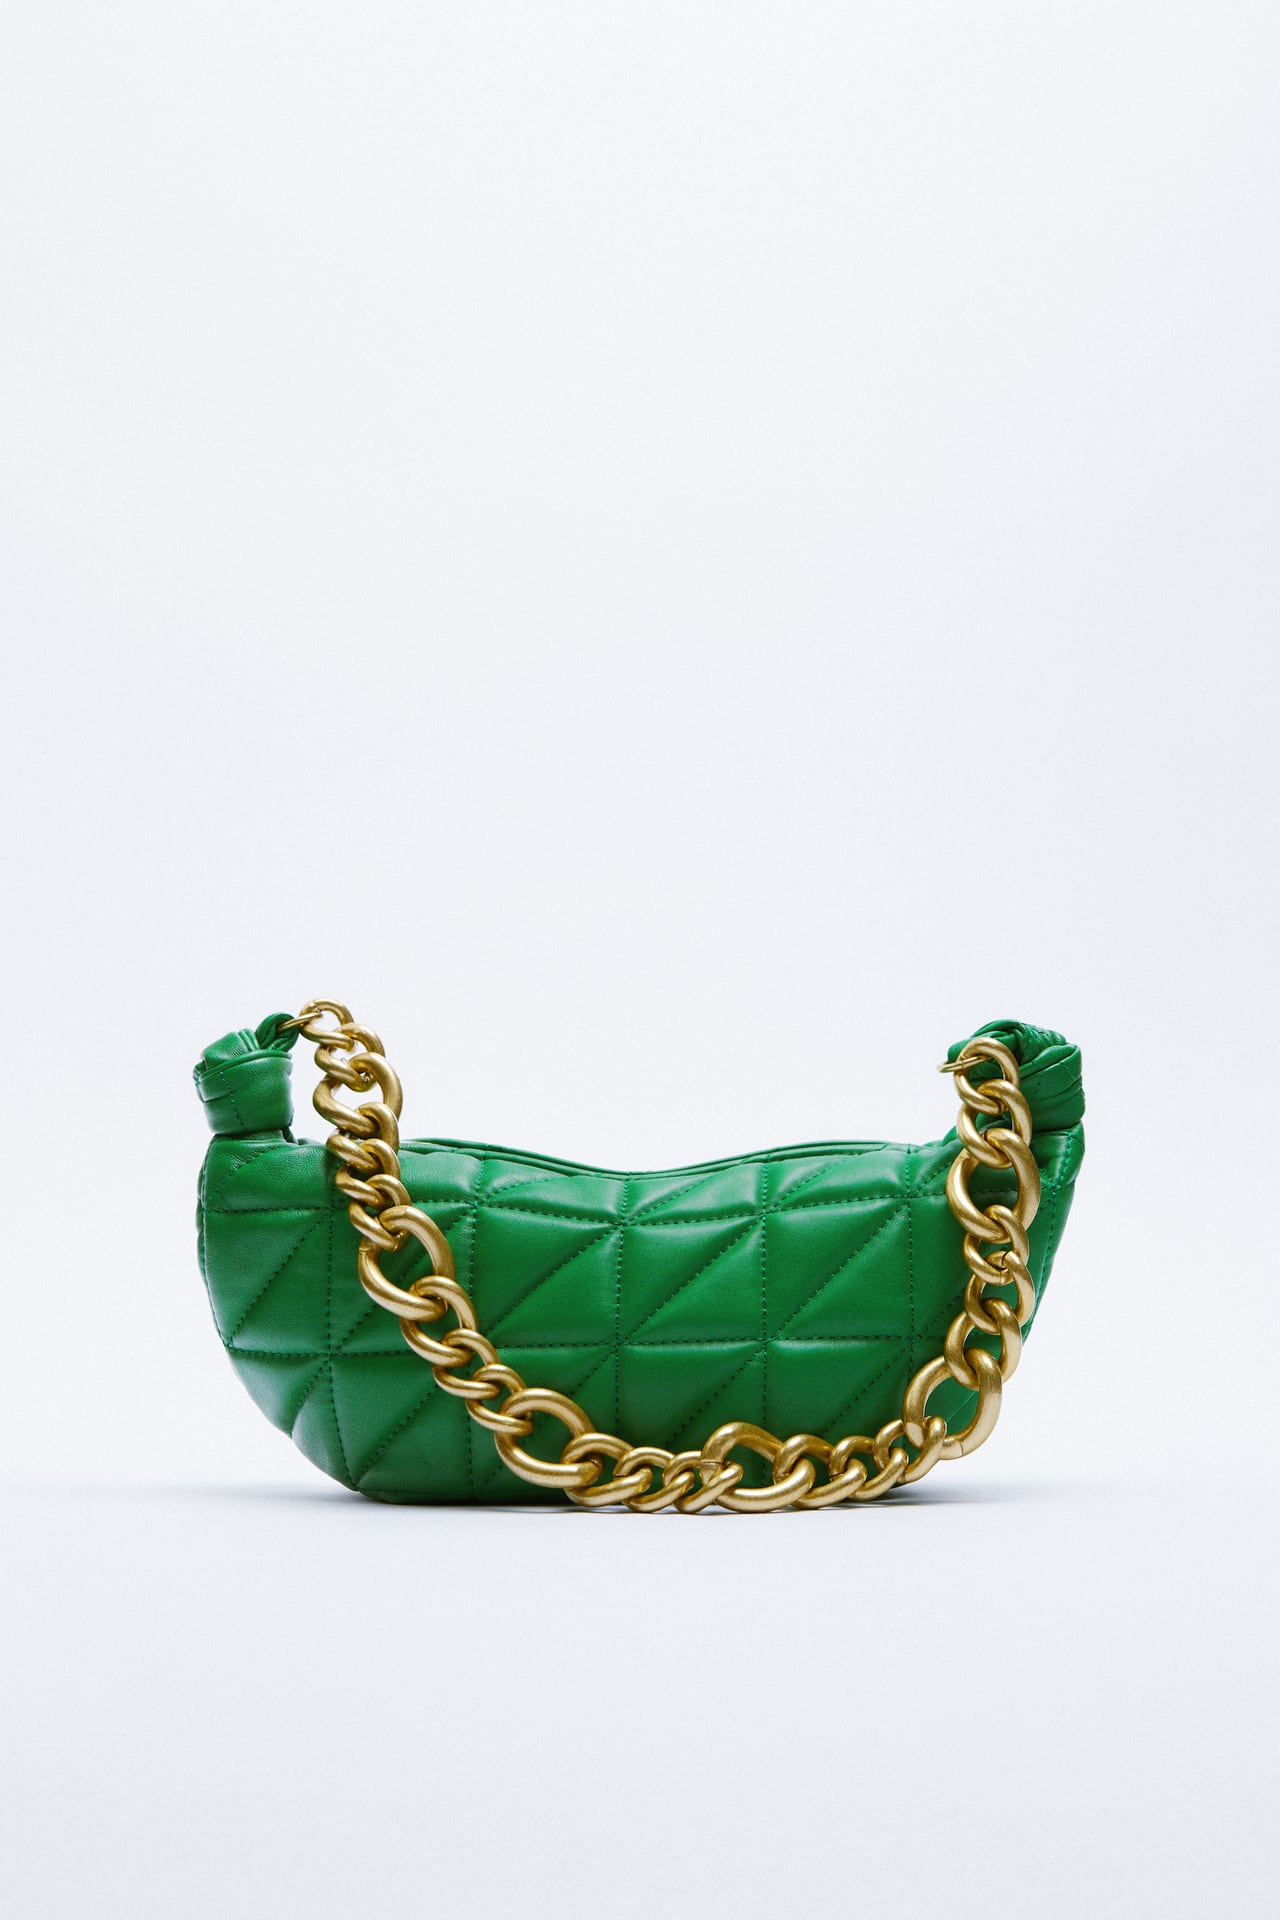 Zara Chain Handled Quilted Leather Bag